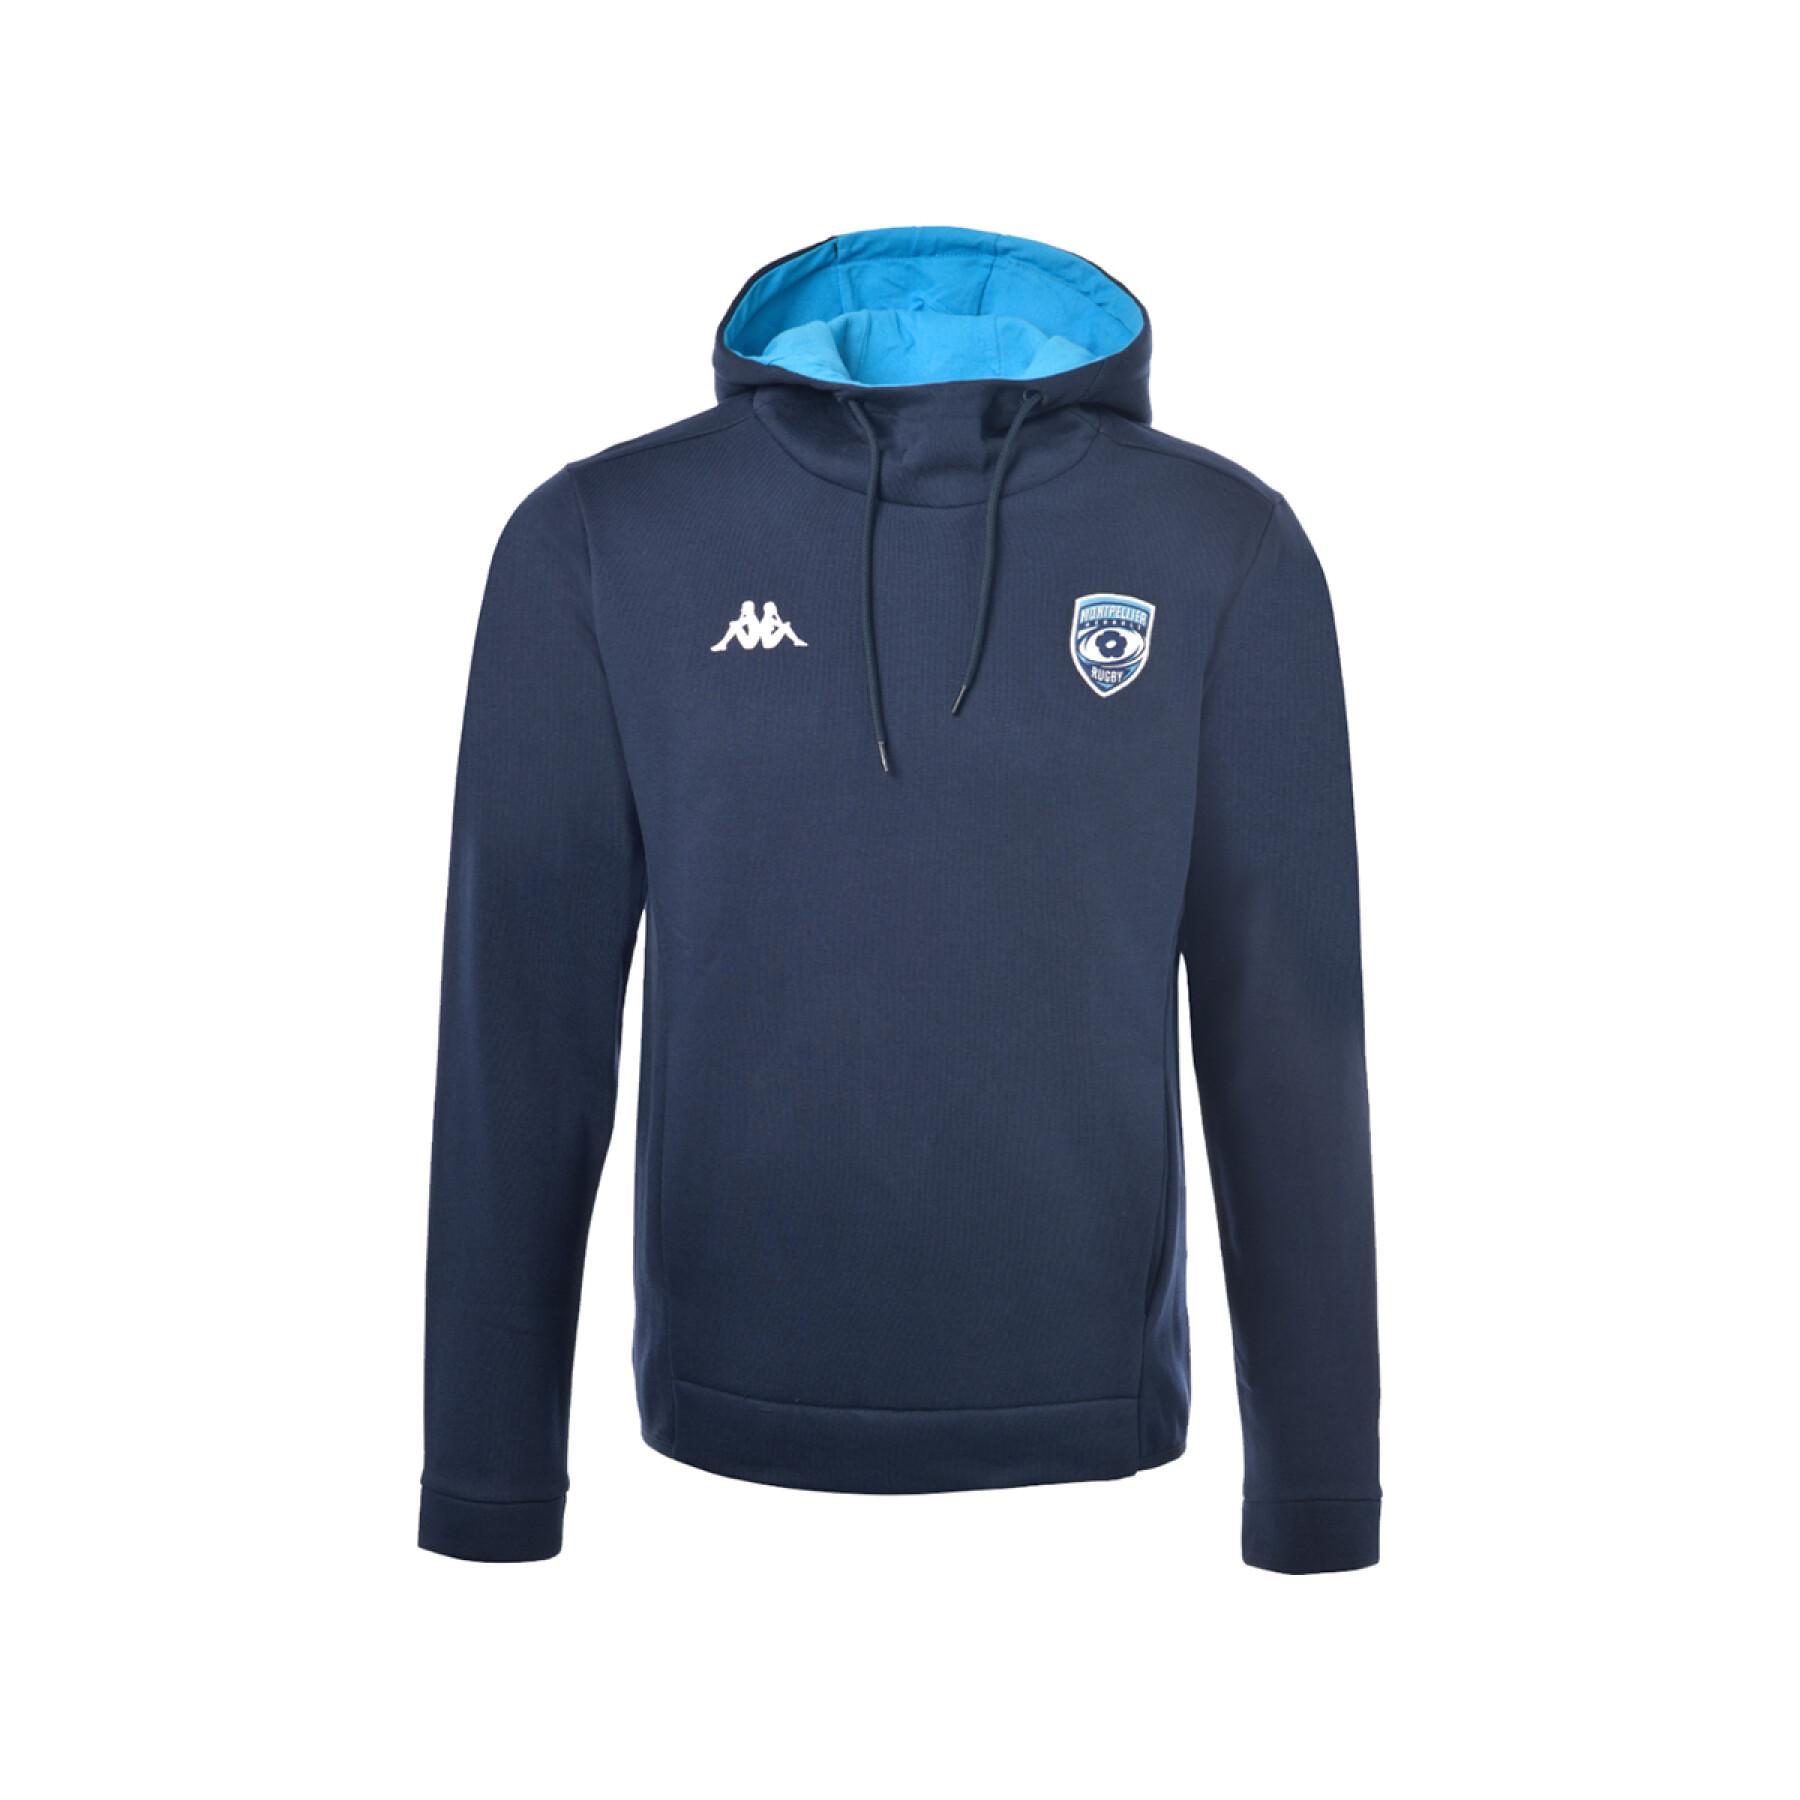 Sudadera niño piave Montpellier Hérault Rugby